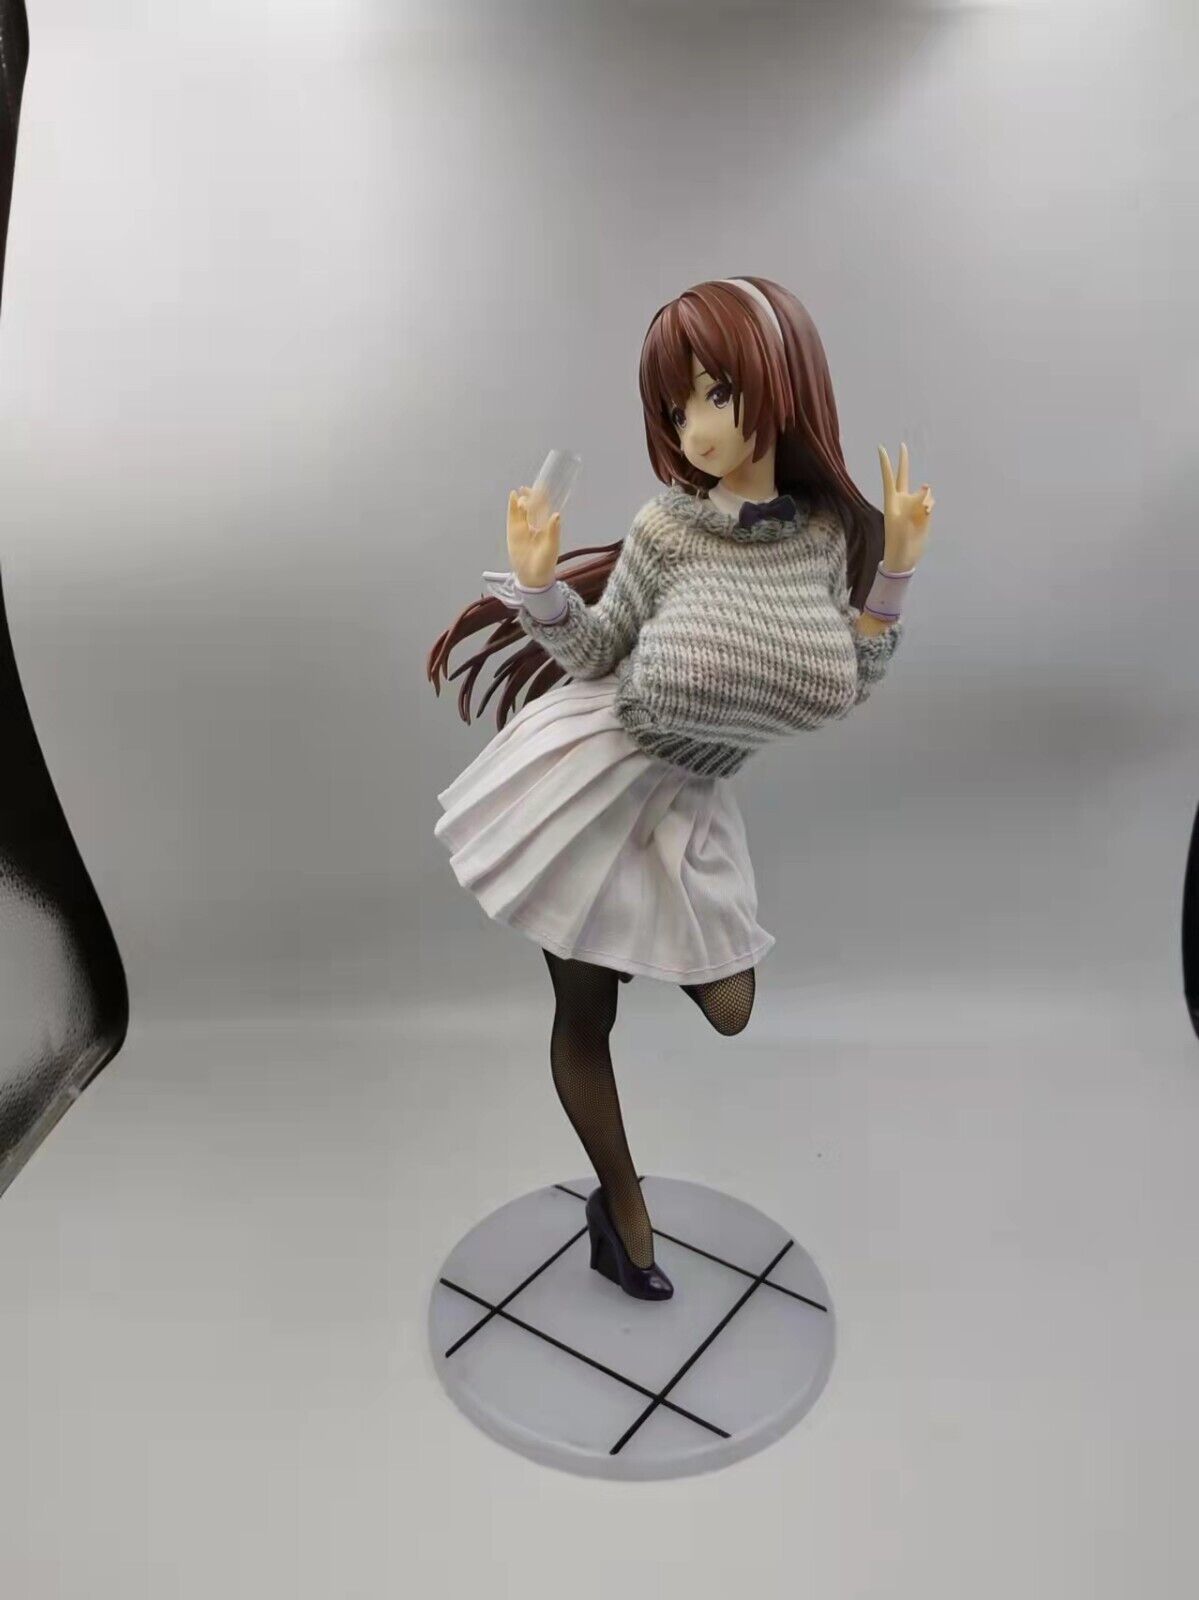 New 1/4 43CM  Anime statue Characters Figures PVC Toy  Collect toy gift No box